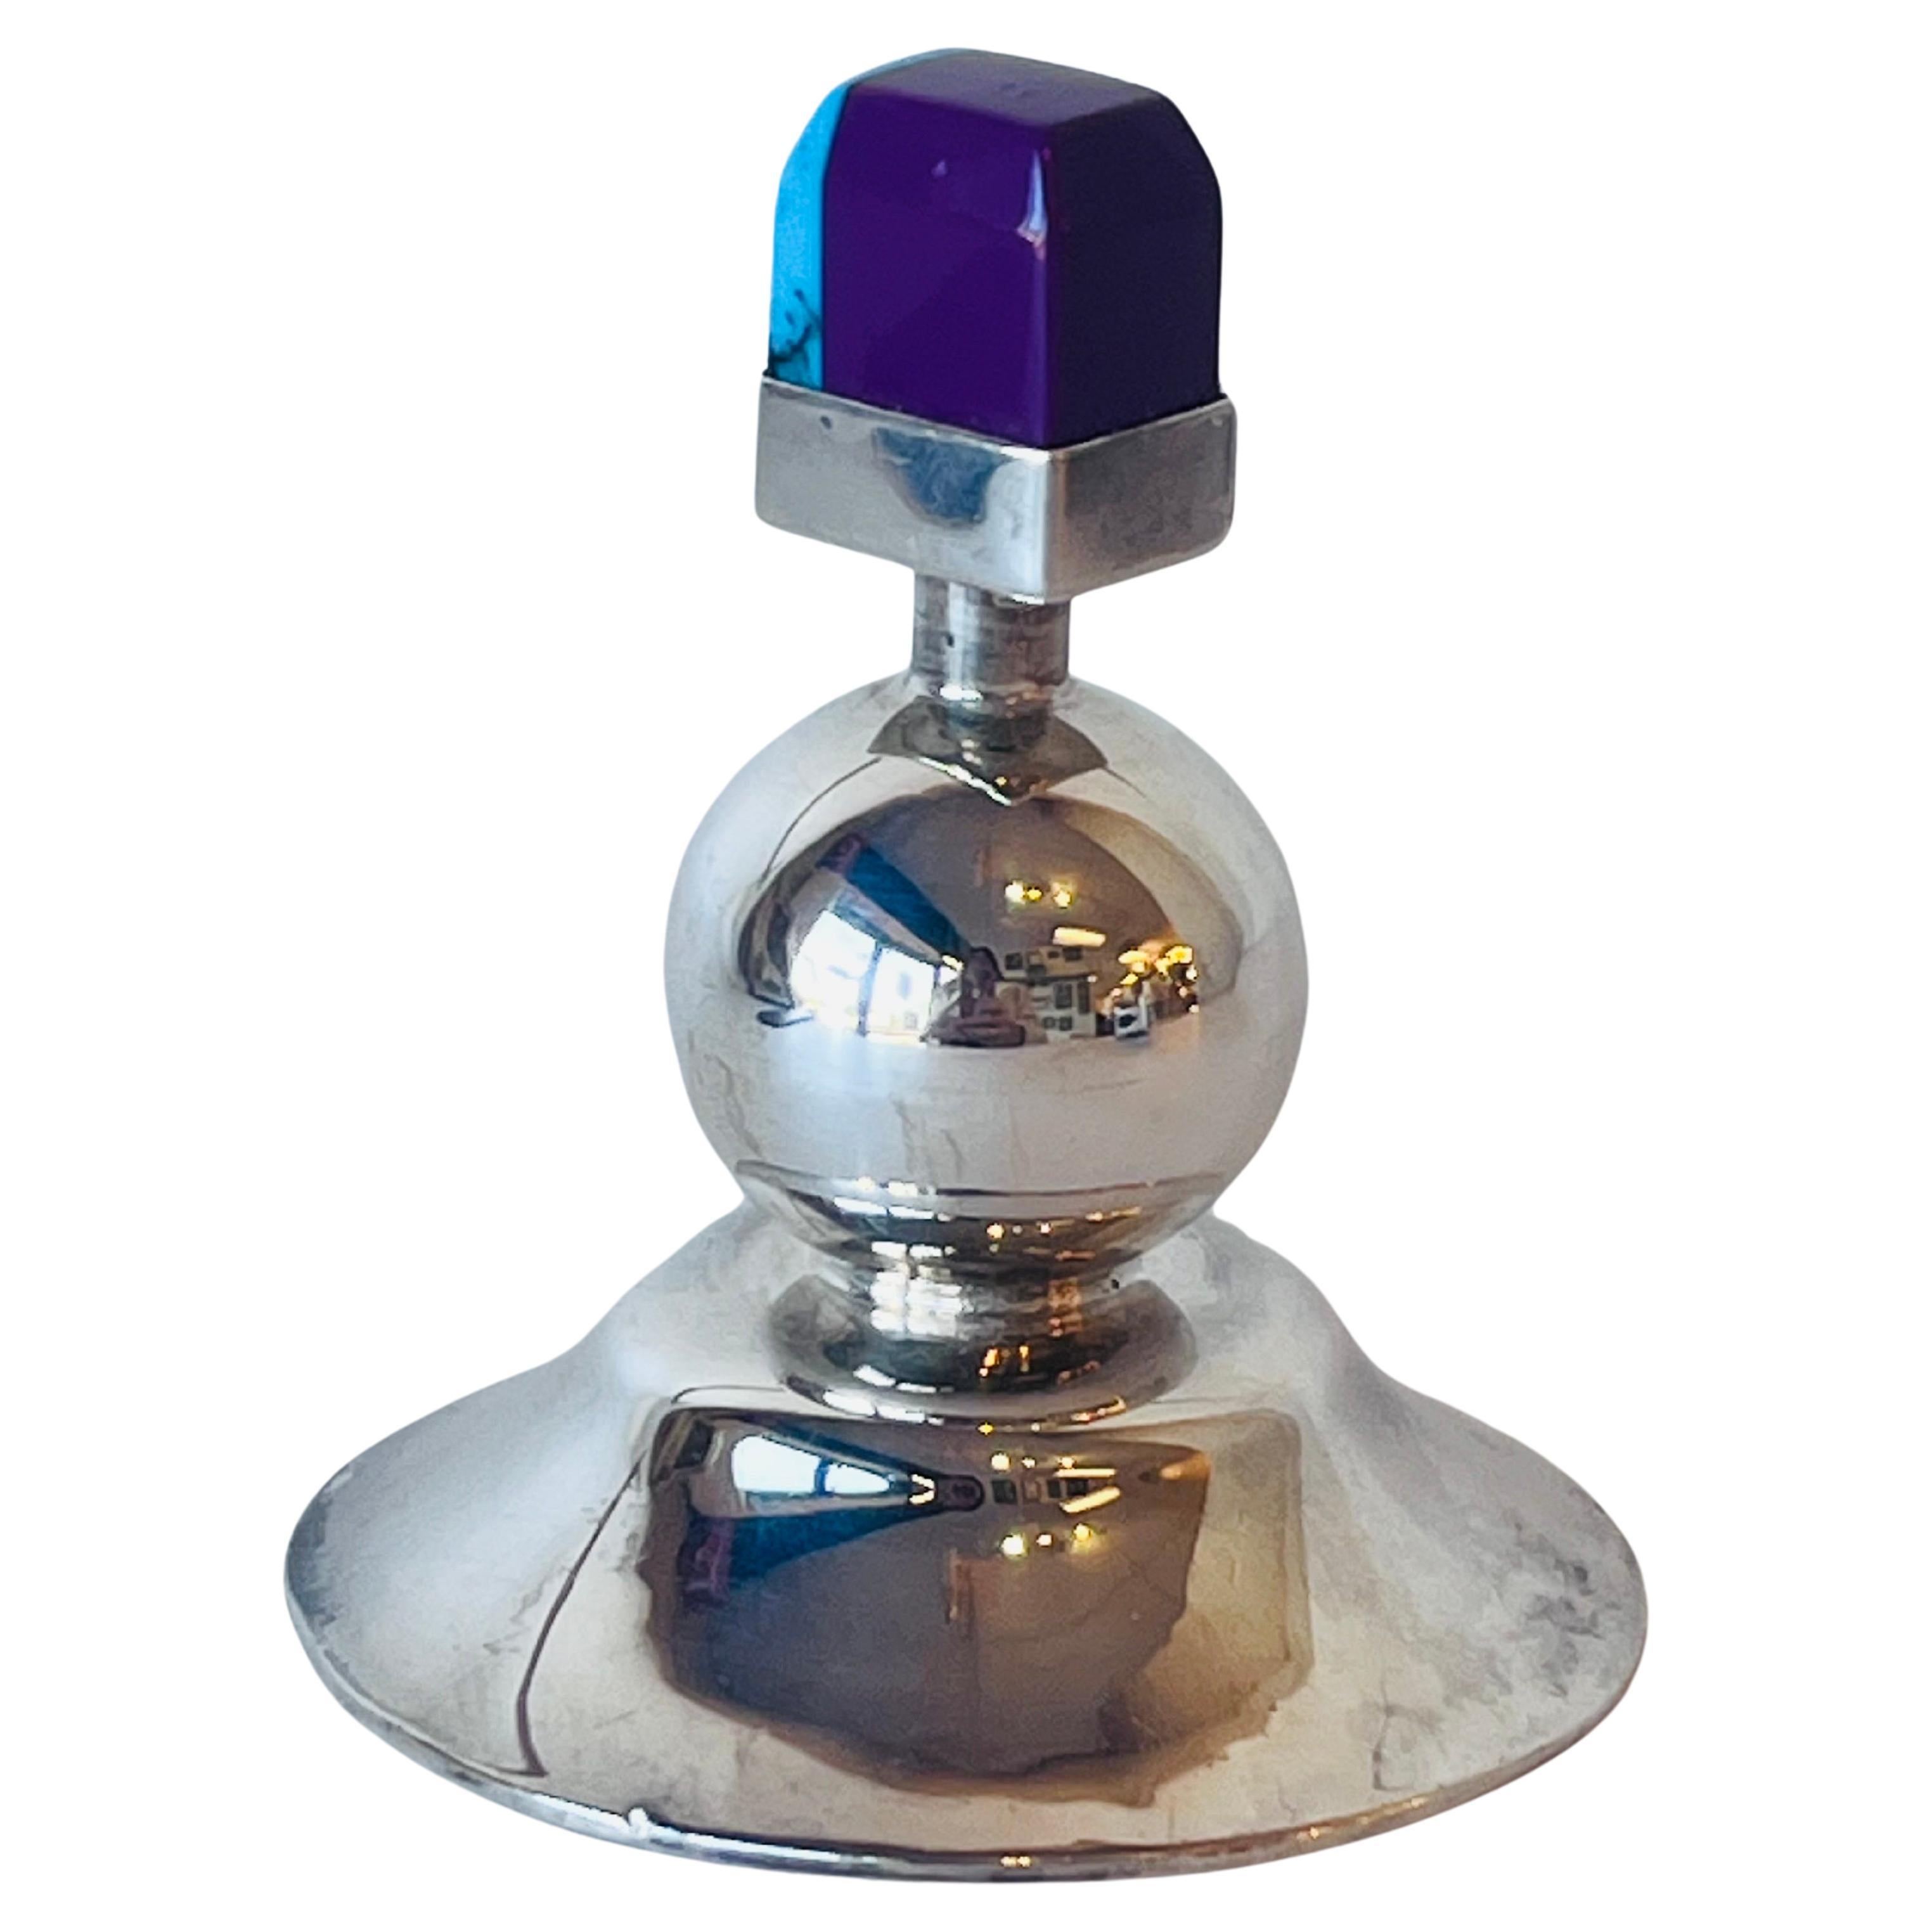 A vintage sterling silver Mexican post modern style perfume bottle with a multi colored threaded stopper. The sloped and slightly undulating conical form is topped by a spherical design and then finished by the multi colored stopper. I am unsure of